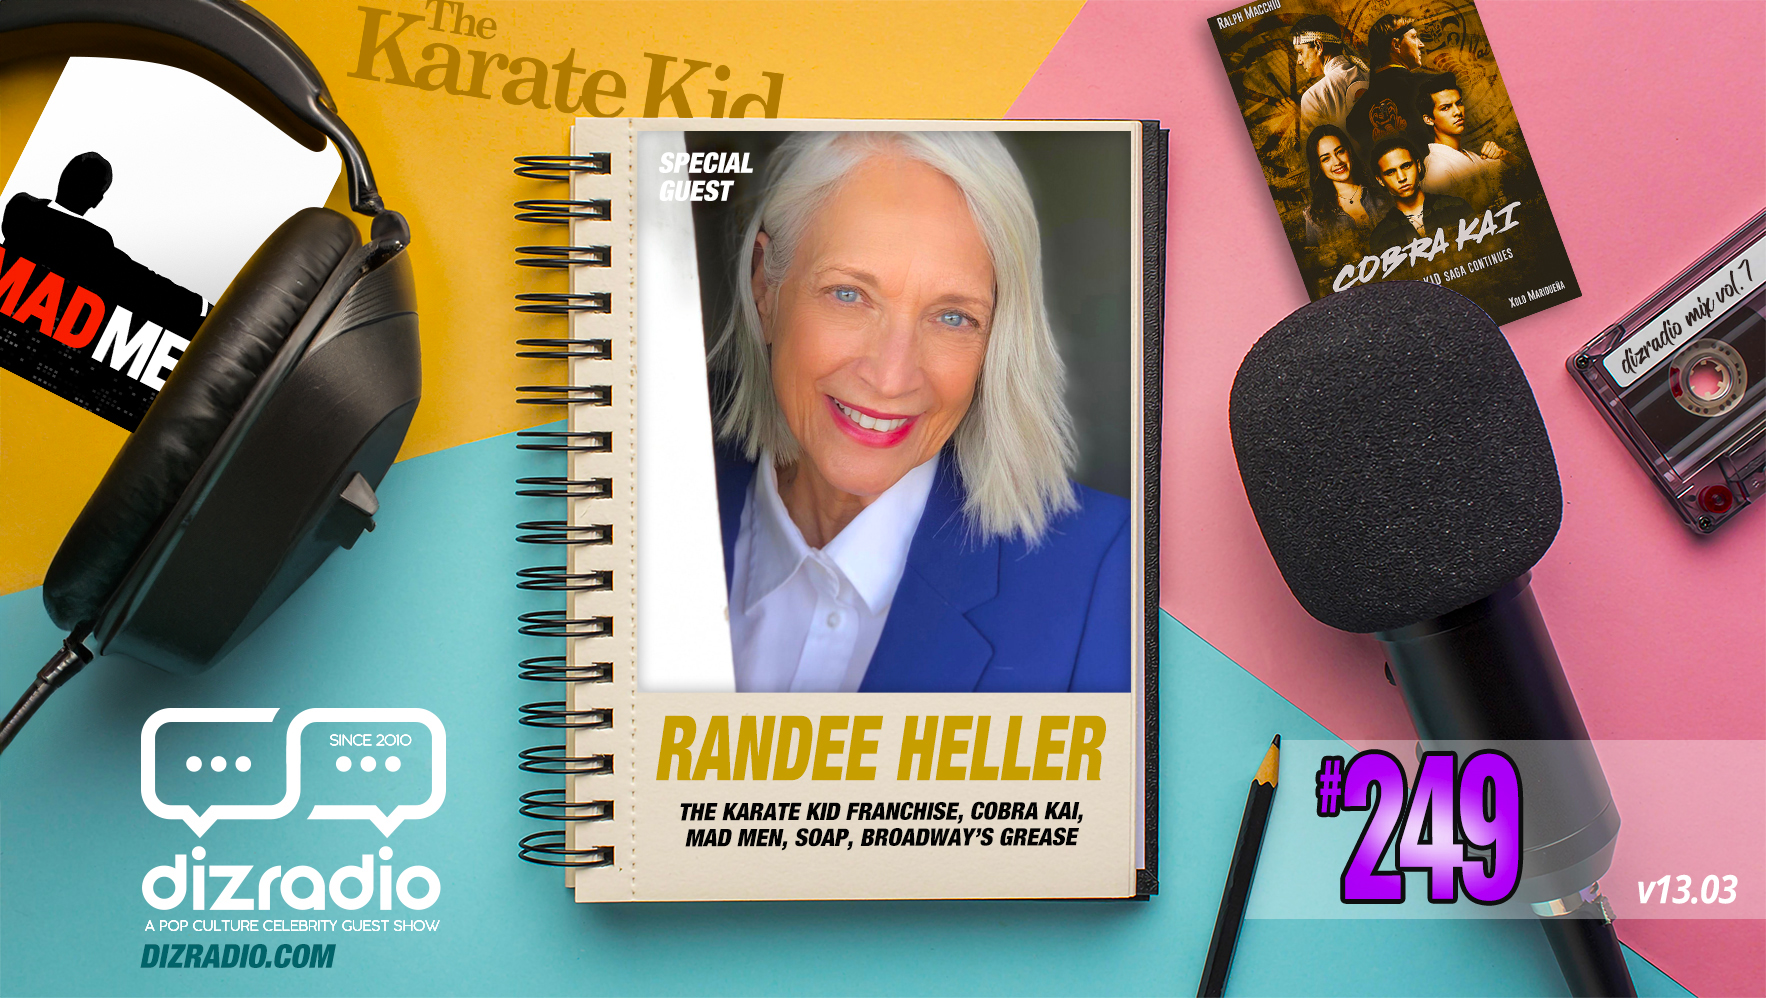 The DizRadio Show #249 w/ Guest RANDEE HELLER (The Karate Kid Franchise, Cobra Kai, Mad Men, SOAP, Shudder's Destroy All Neighbors, Grease on Broadway)